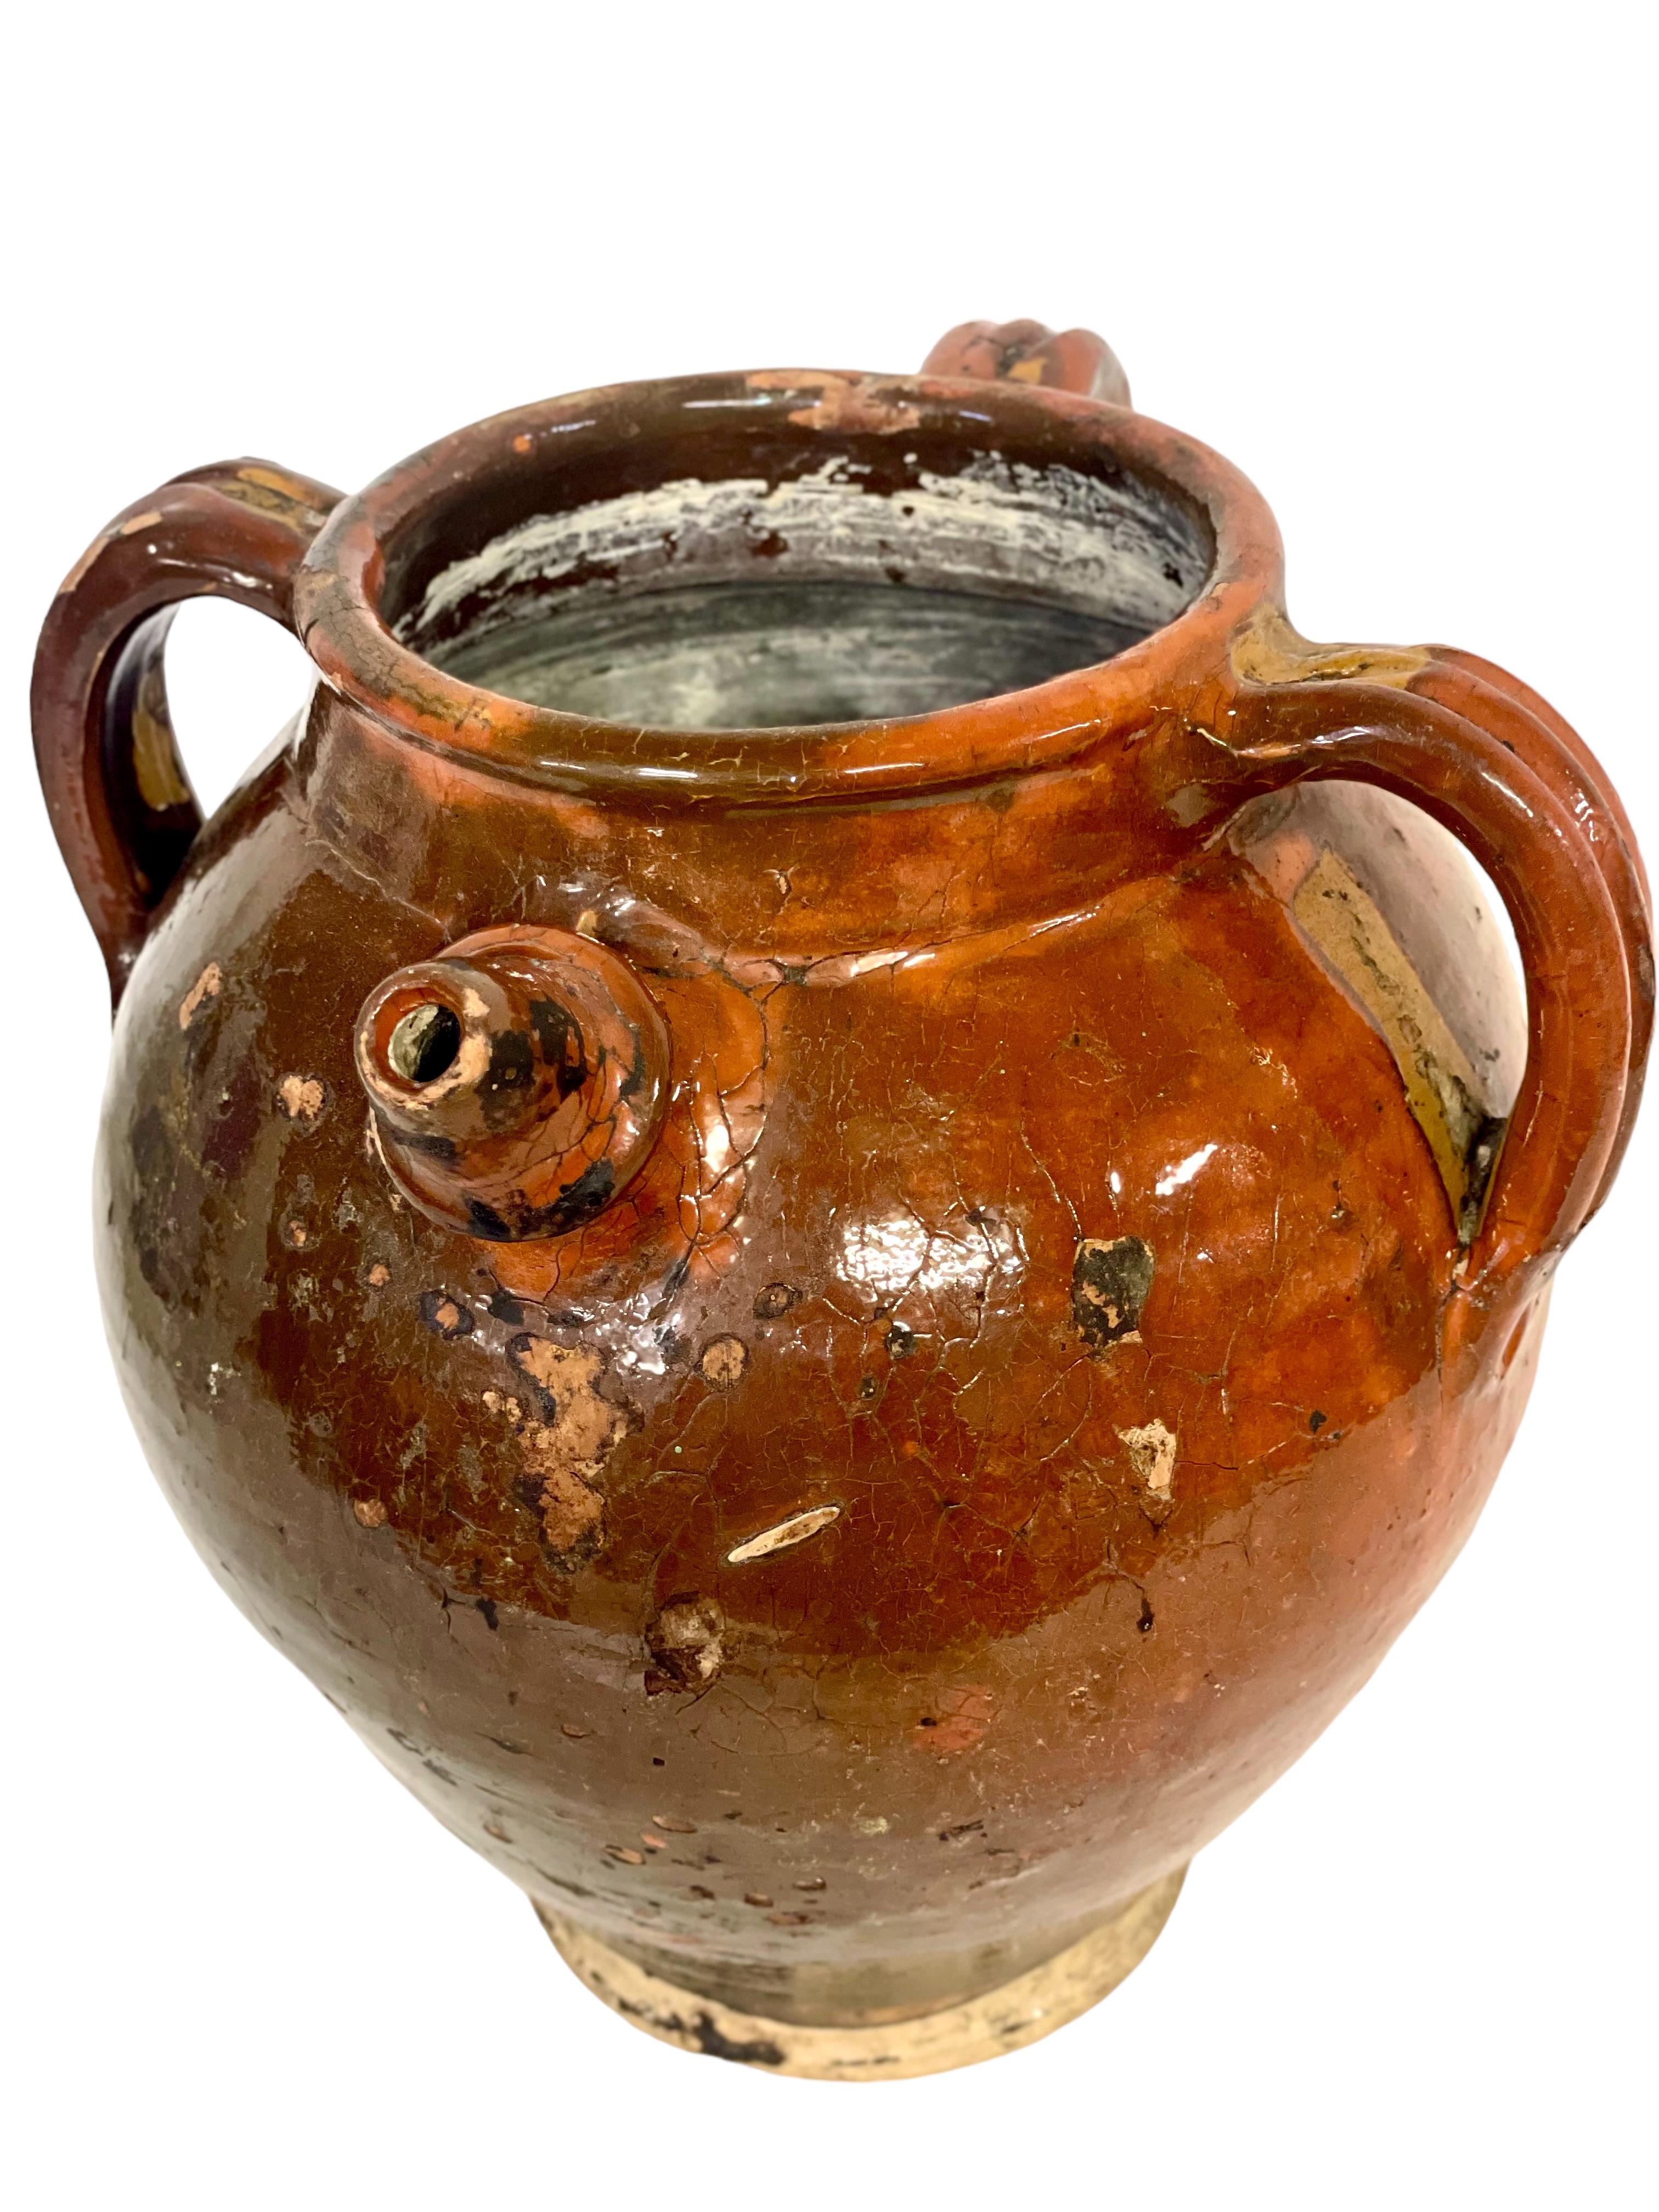 A gorgeous 19th century water, or olive oil, jug, glazed, inside and out in warm rustic tones of brown and green. Full of character, this unusual storage vessel features a short and shaped spout and three substantial upper handles around its rim to